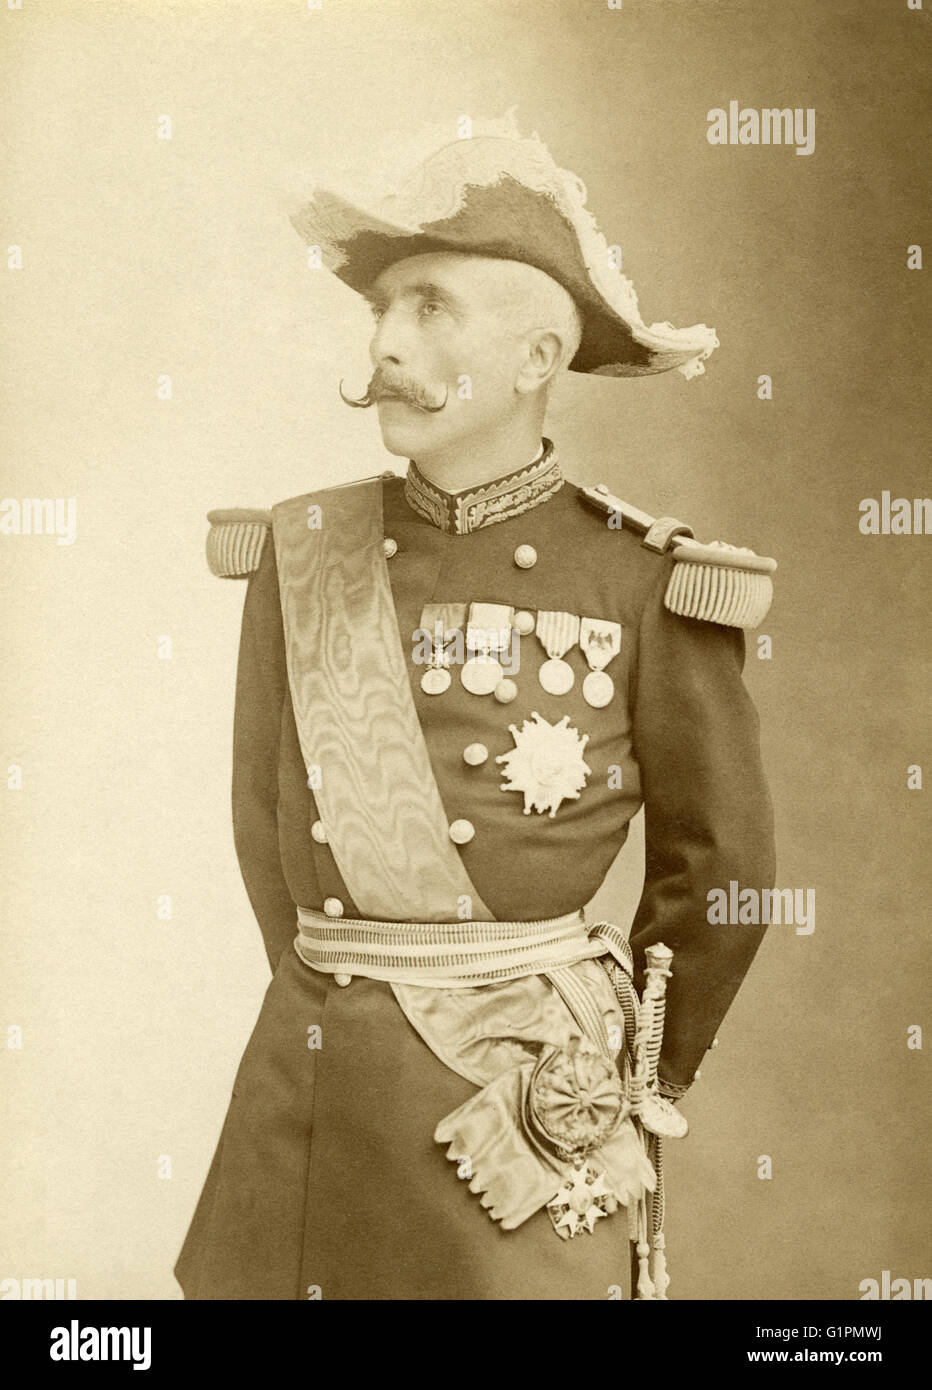 MARQUIS DE GALLIFFET  (1830-1909). Gaston Alexandre Auguste. French general. Photographed by Nadar, c1889. Stock Photo